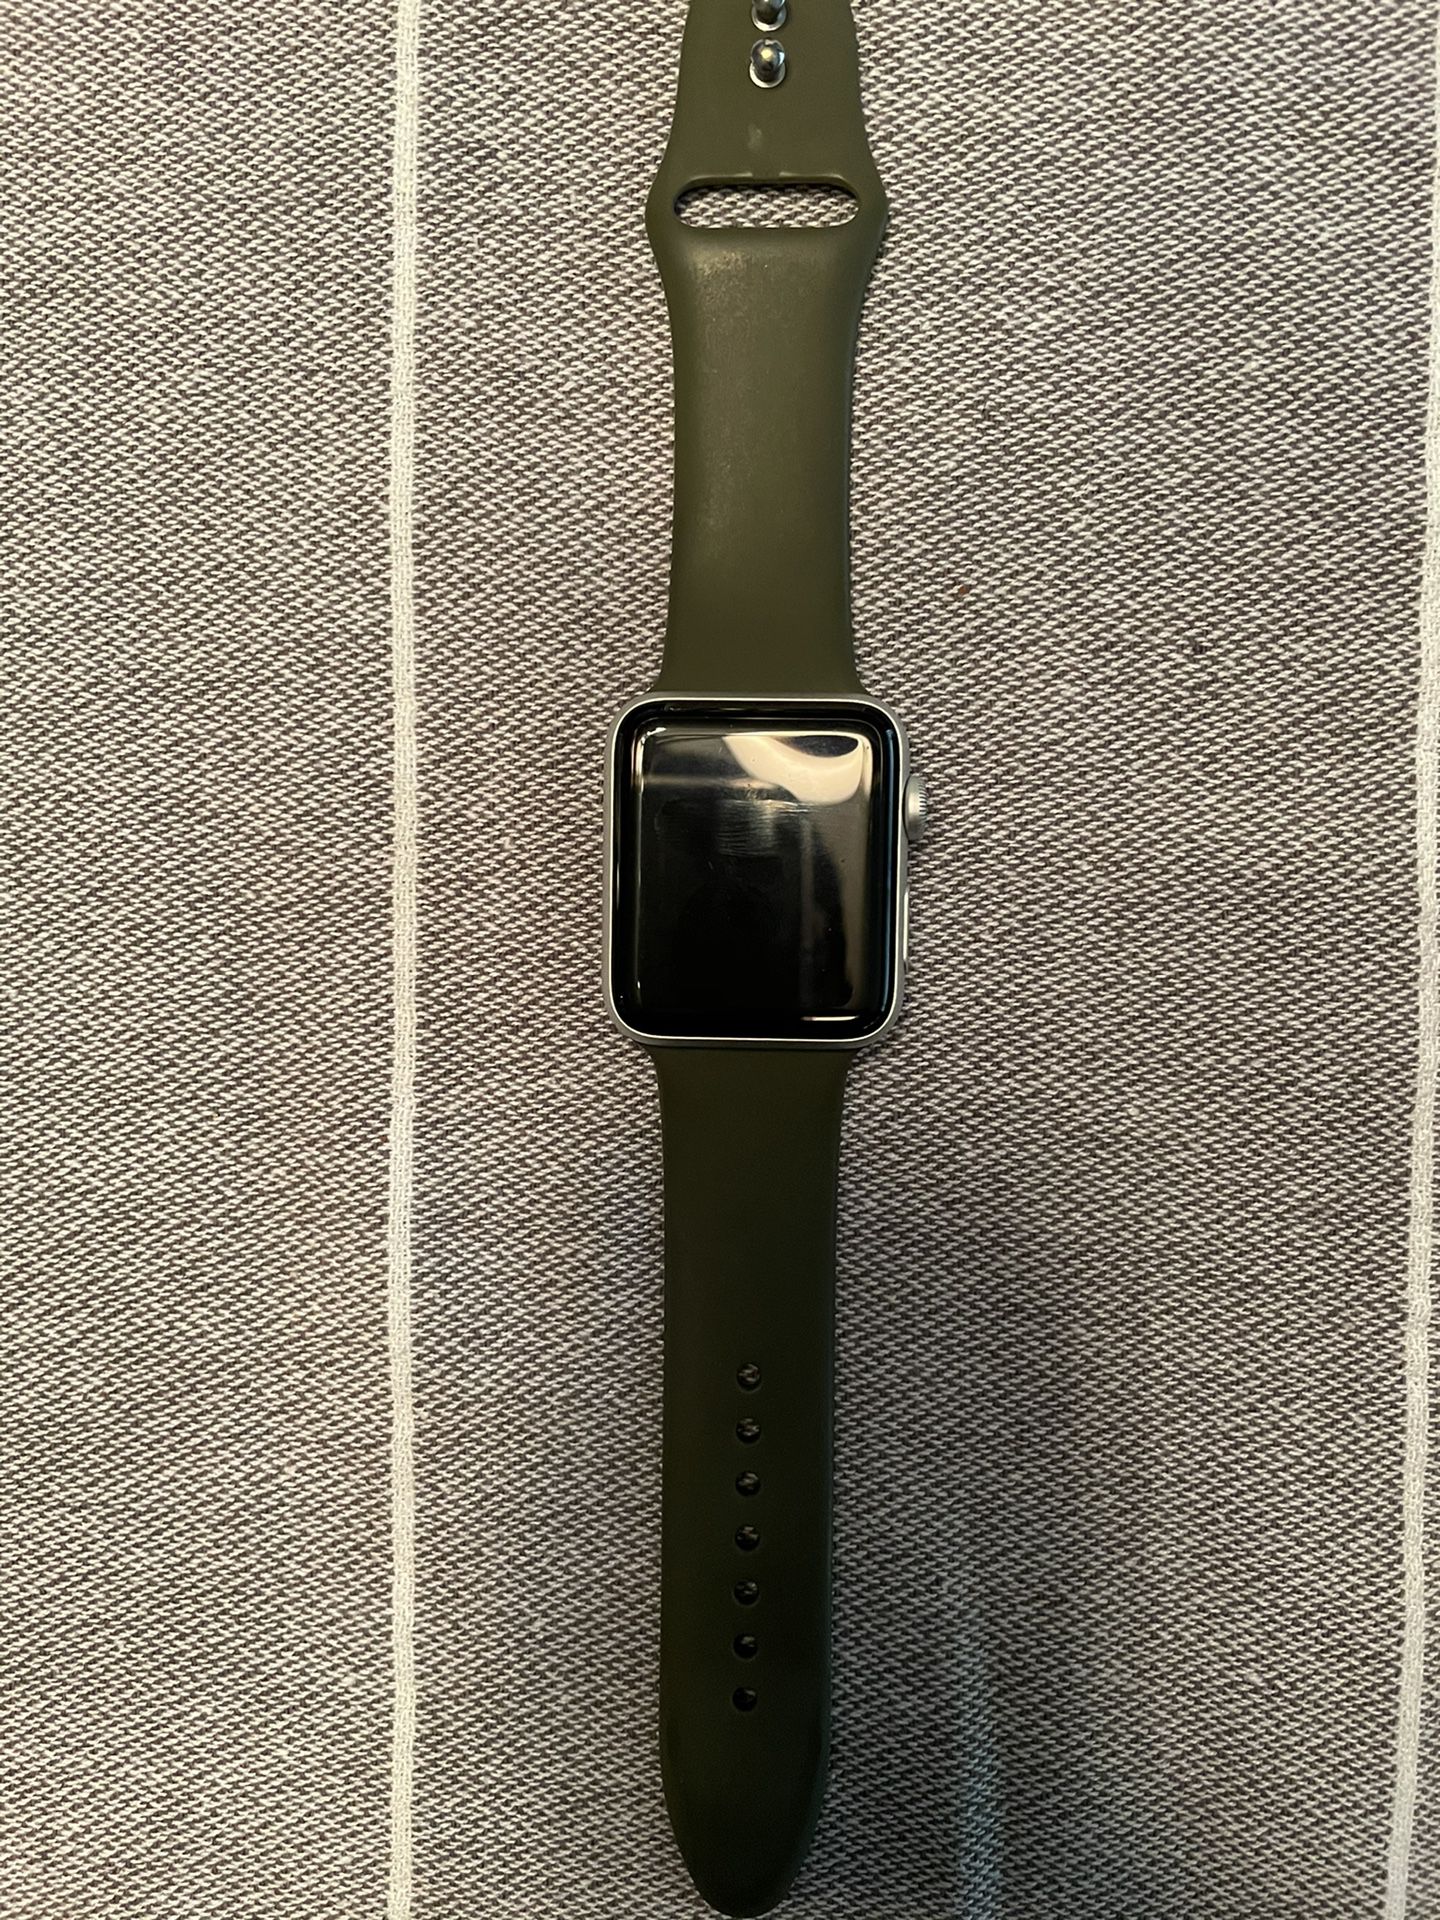 Apple Watch 3 WiFi And Cellular